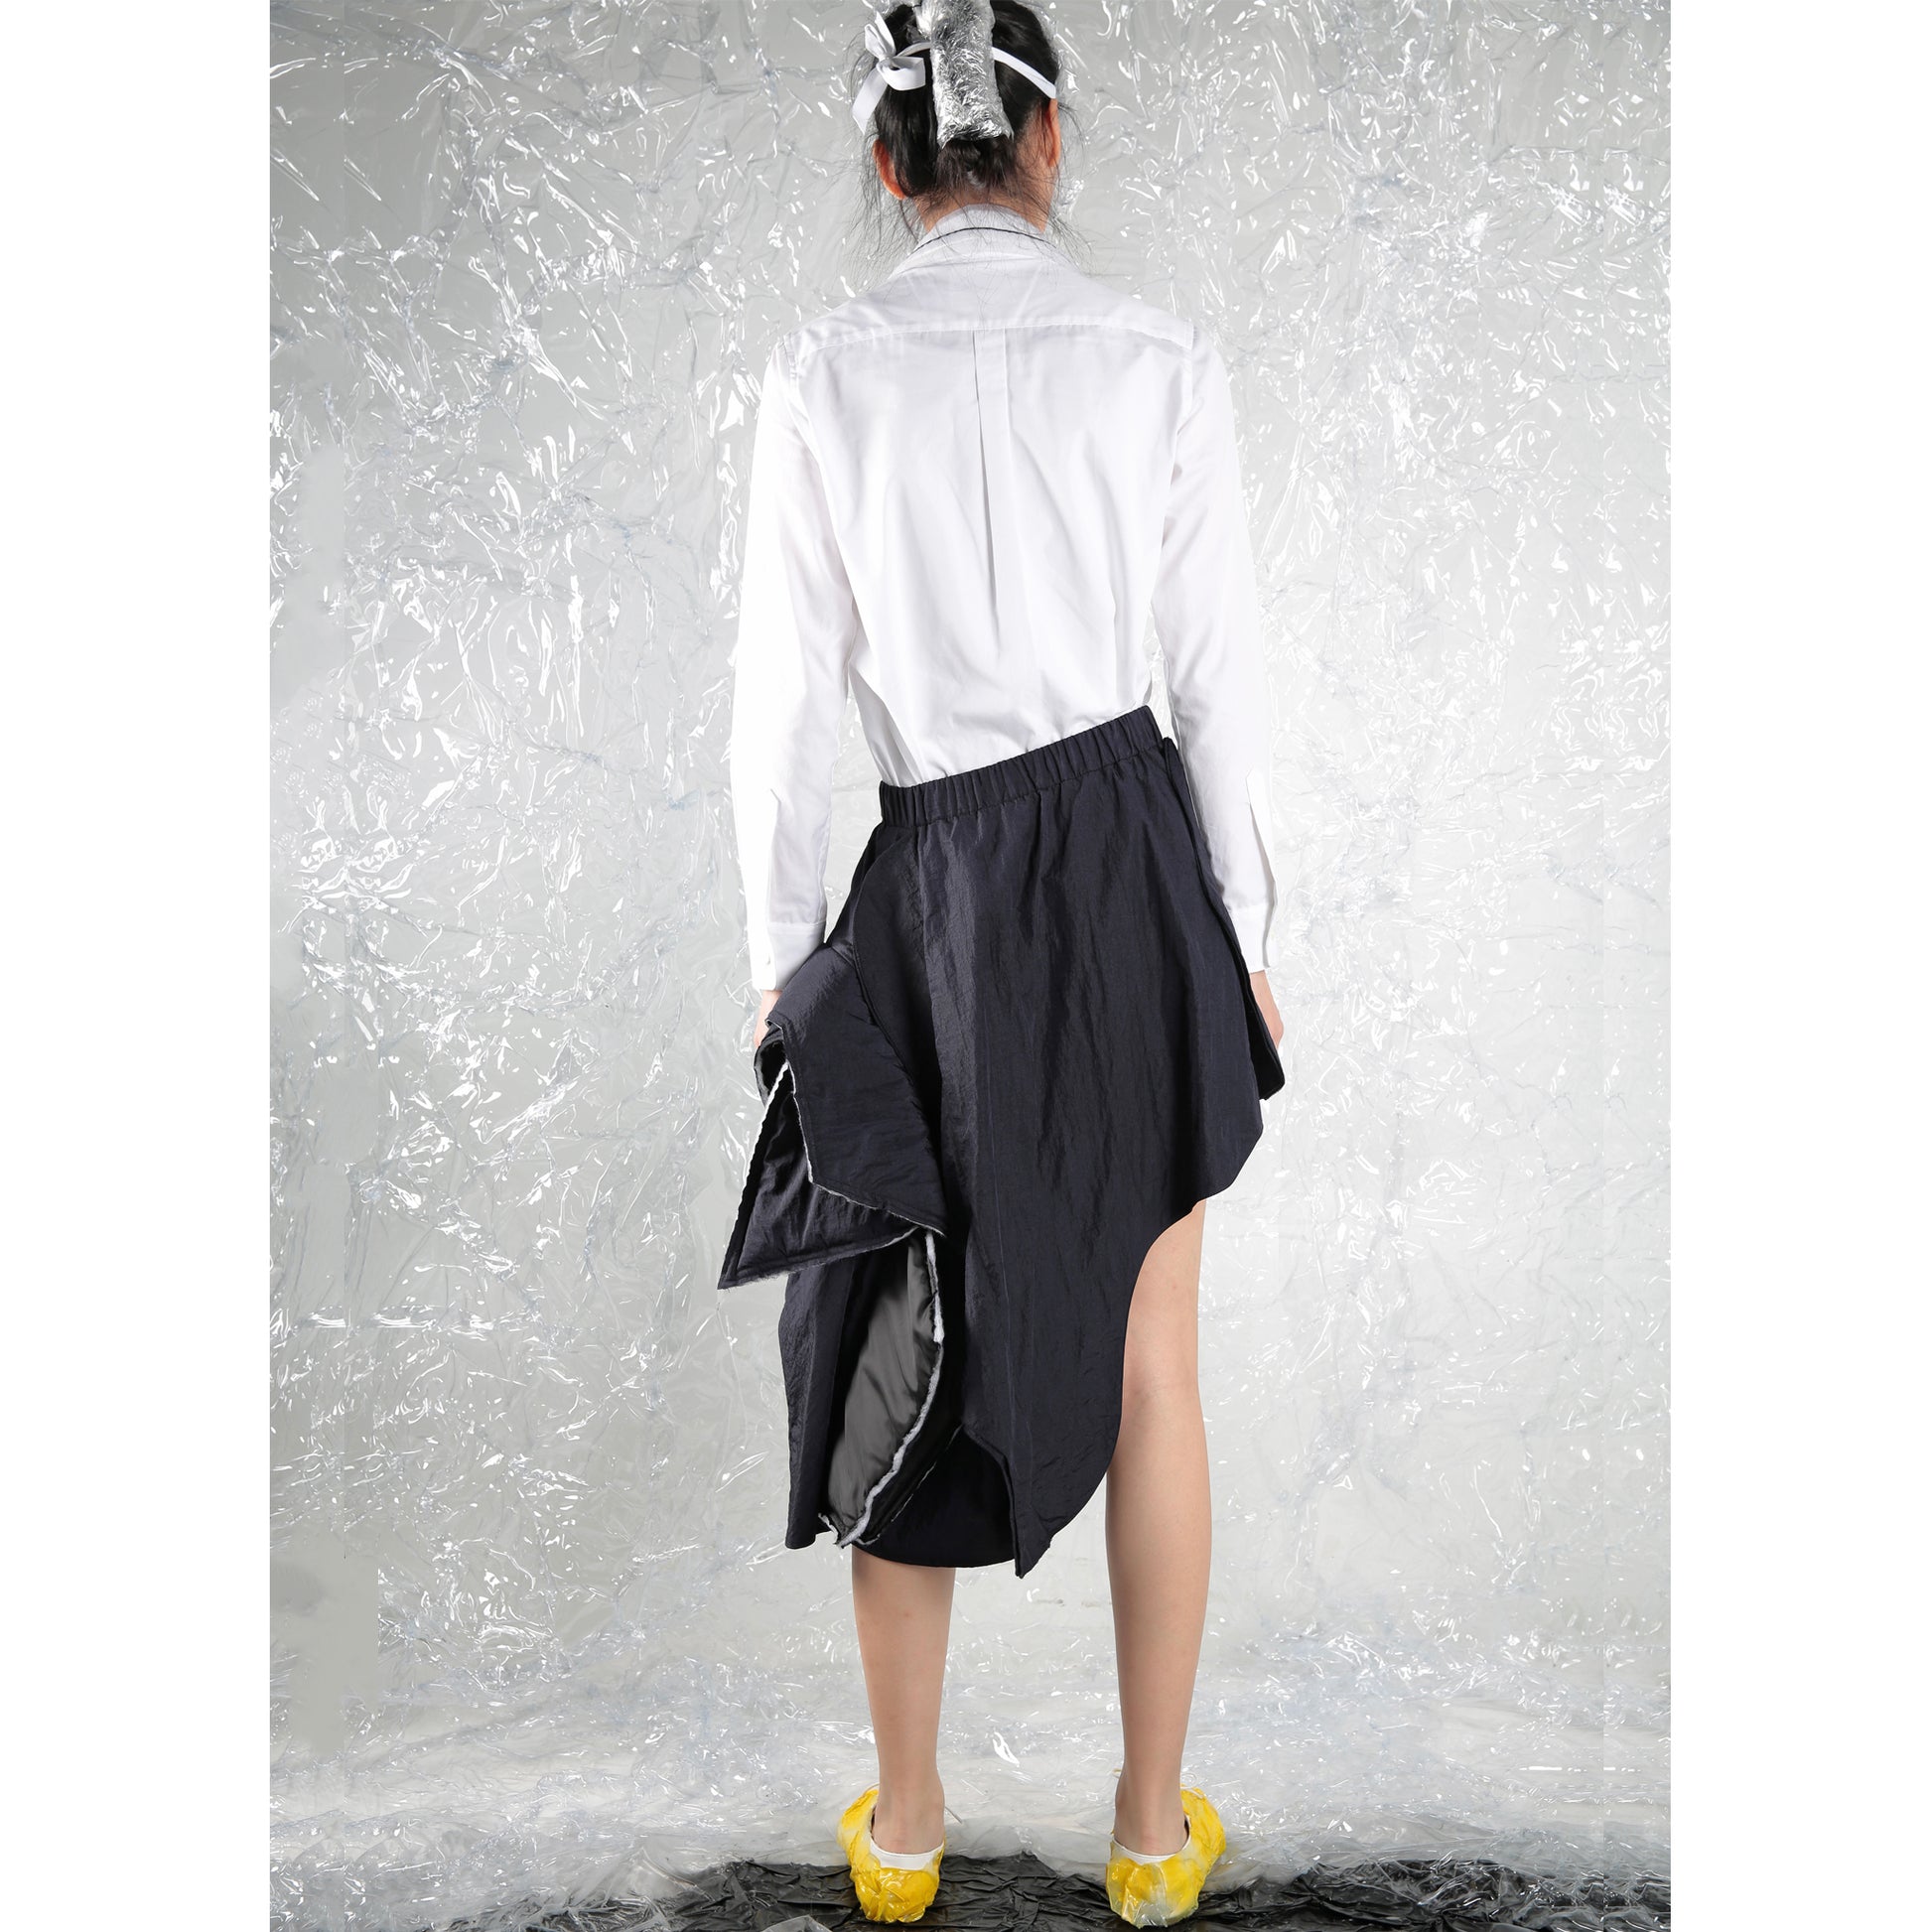 Skirt Asy Cut with Paddings - phenotypsetter, fashion designer label, unisex, women, accessories